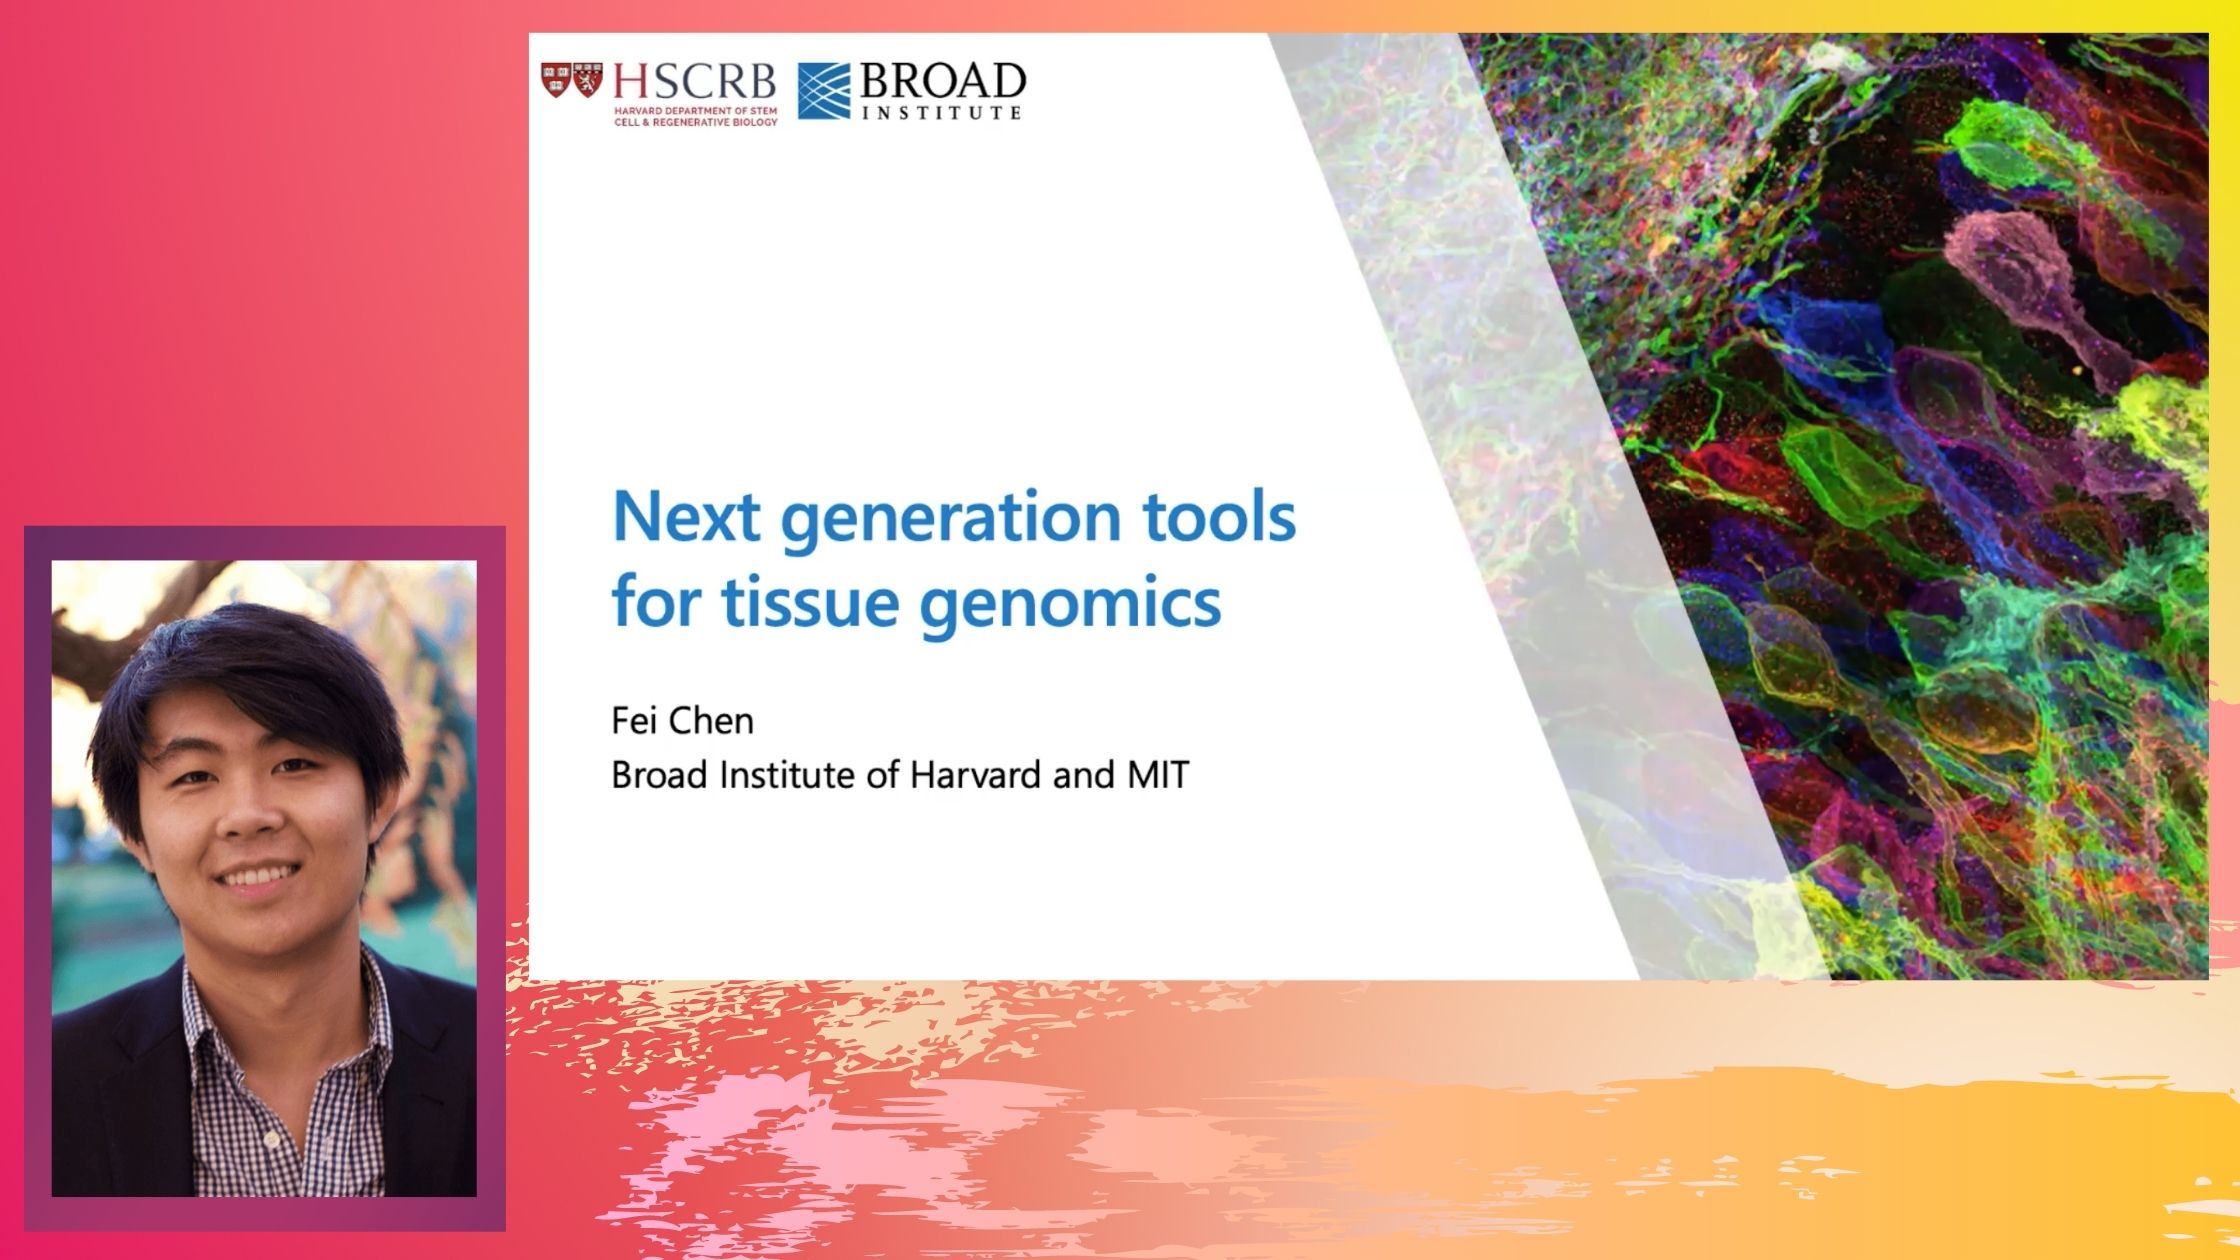 Next Generation Tools for Spatial Tissue Genomics by Dr. Fei Chen